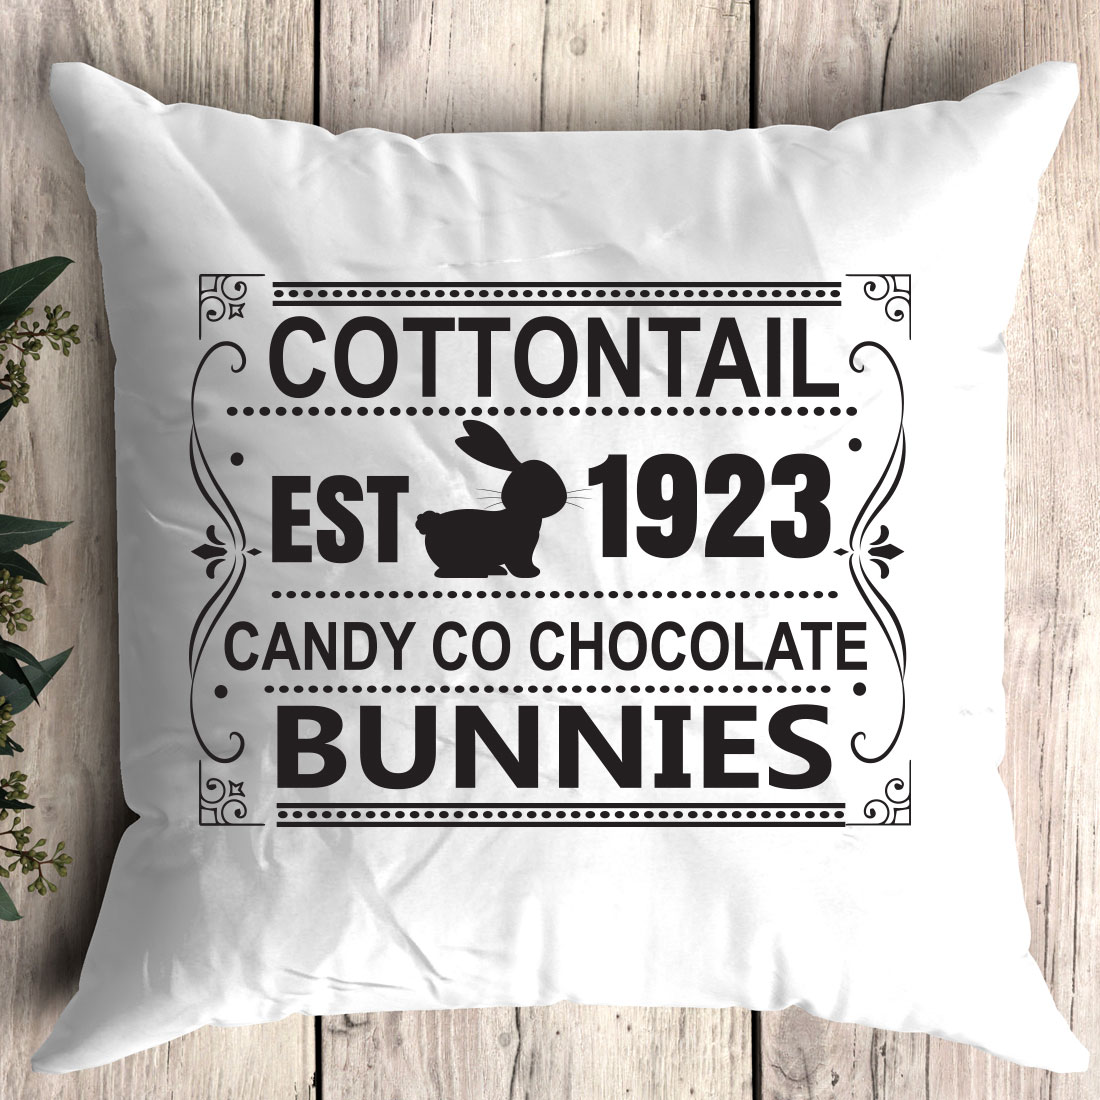 Pillow that says cottontail est 1932 candy co chocolate bunnies.